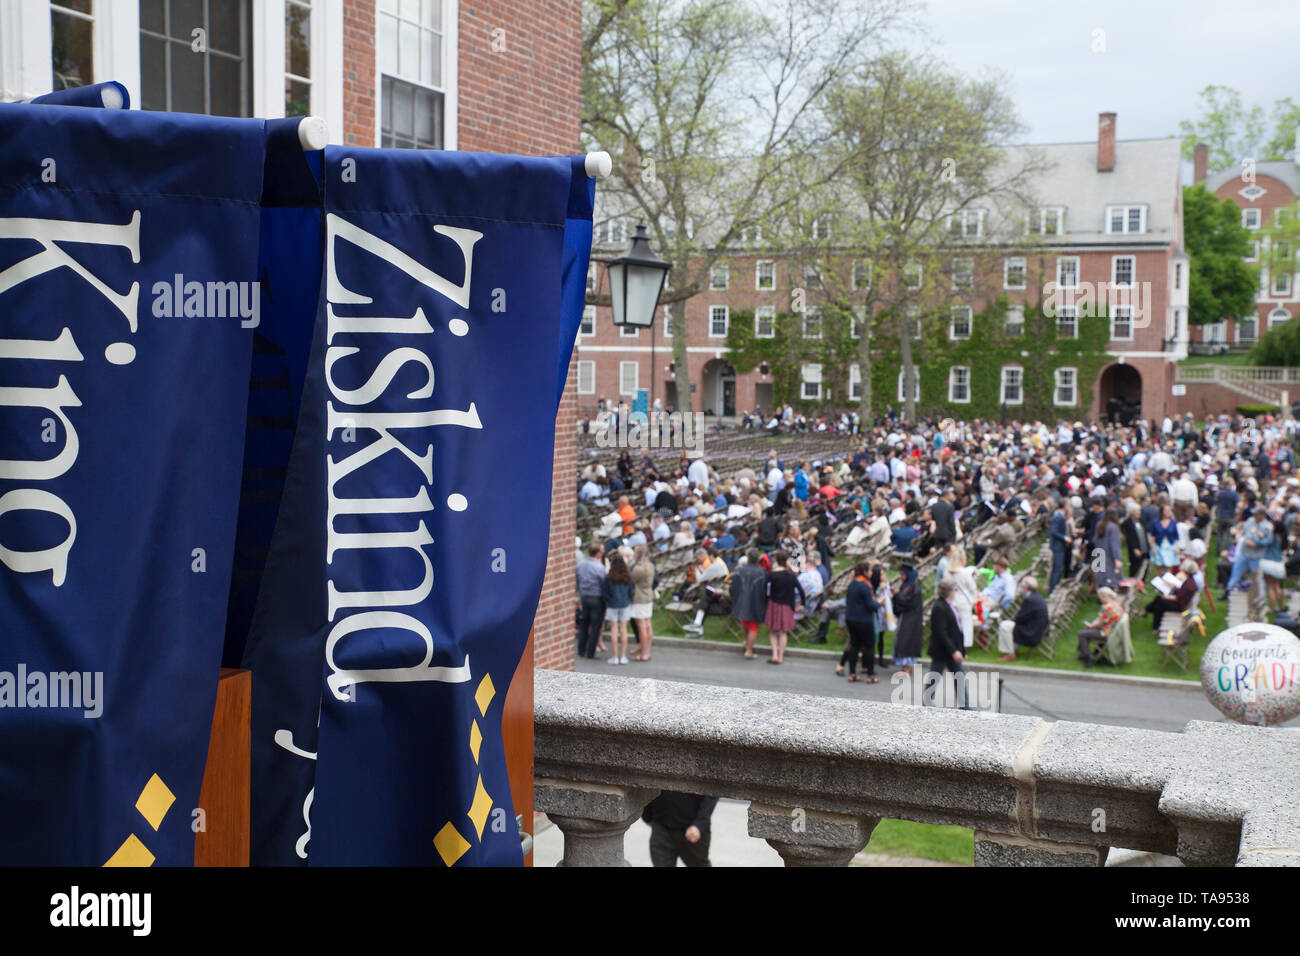 Banners with house names await procession for graduation at Smith College in Northampton, Massachusetts. Stock Photo